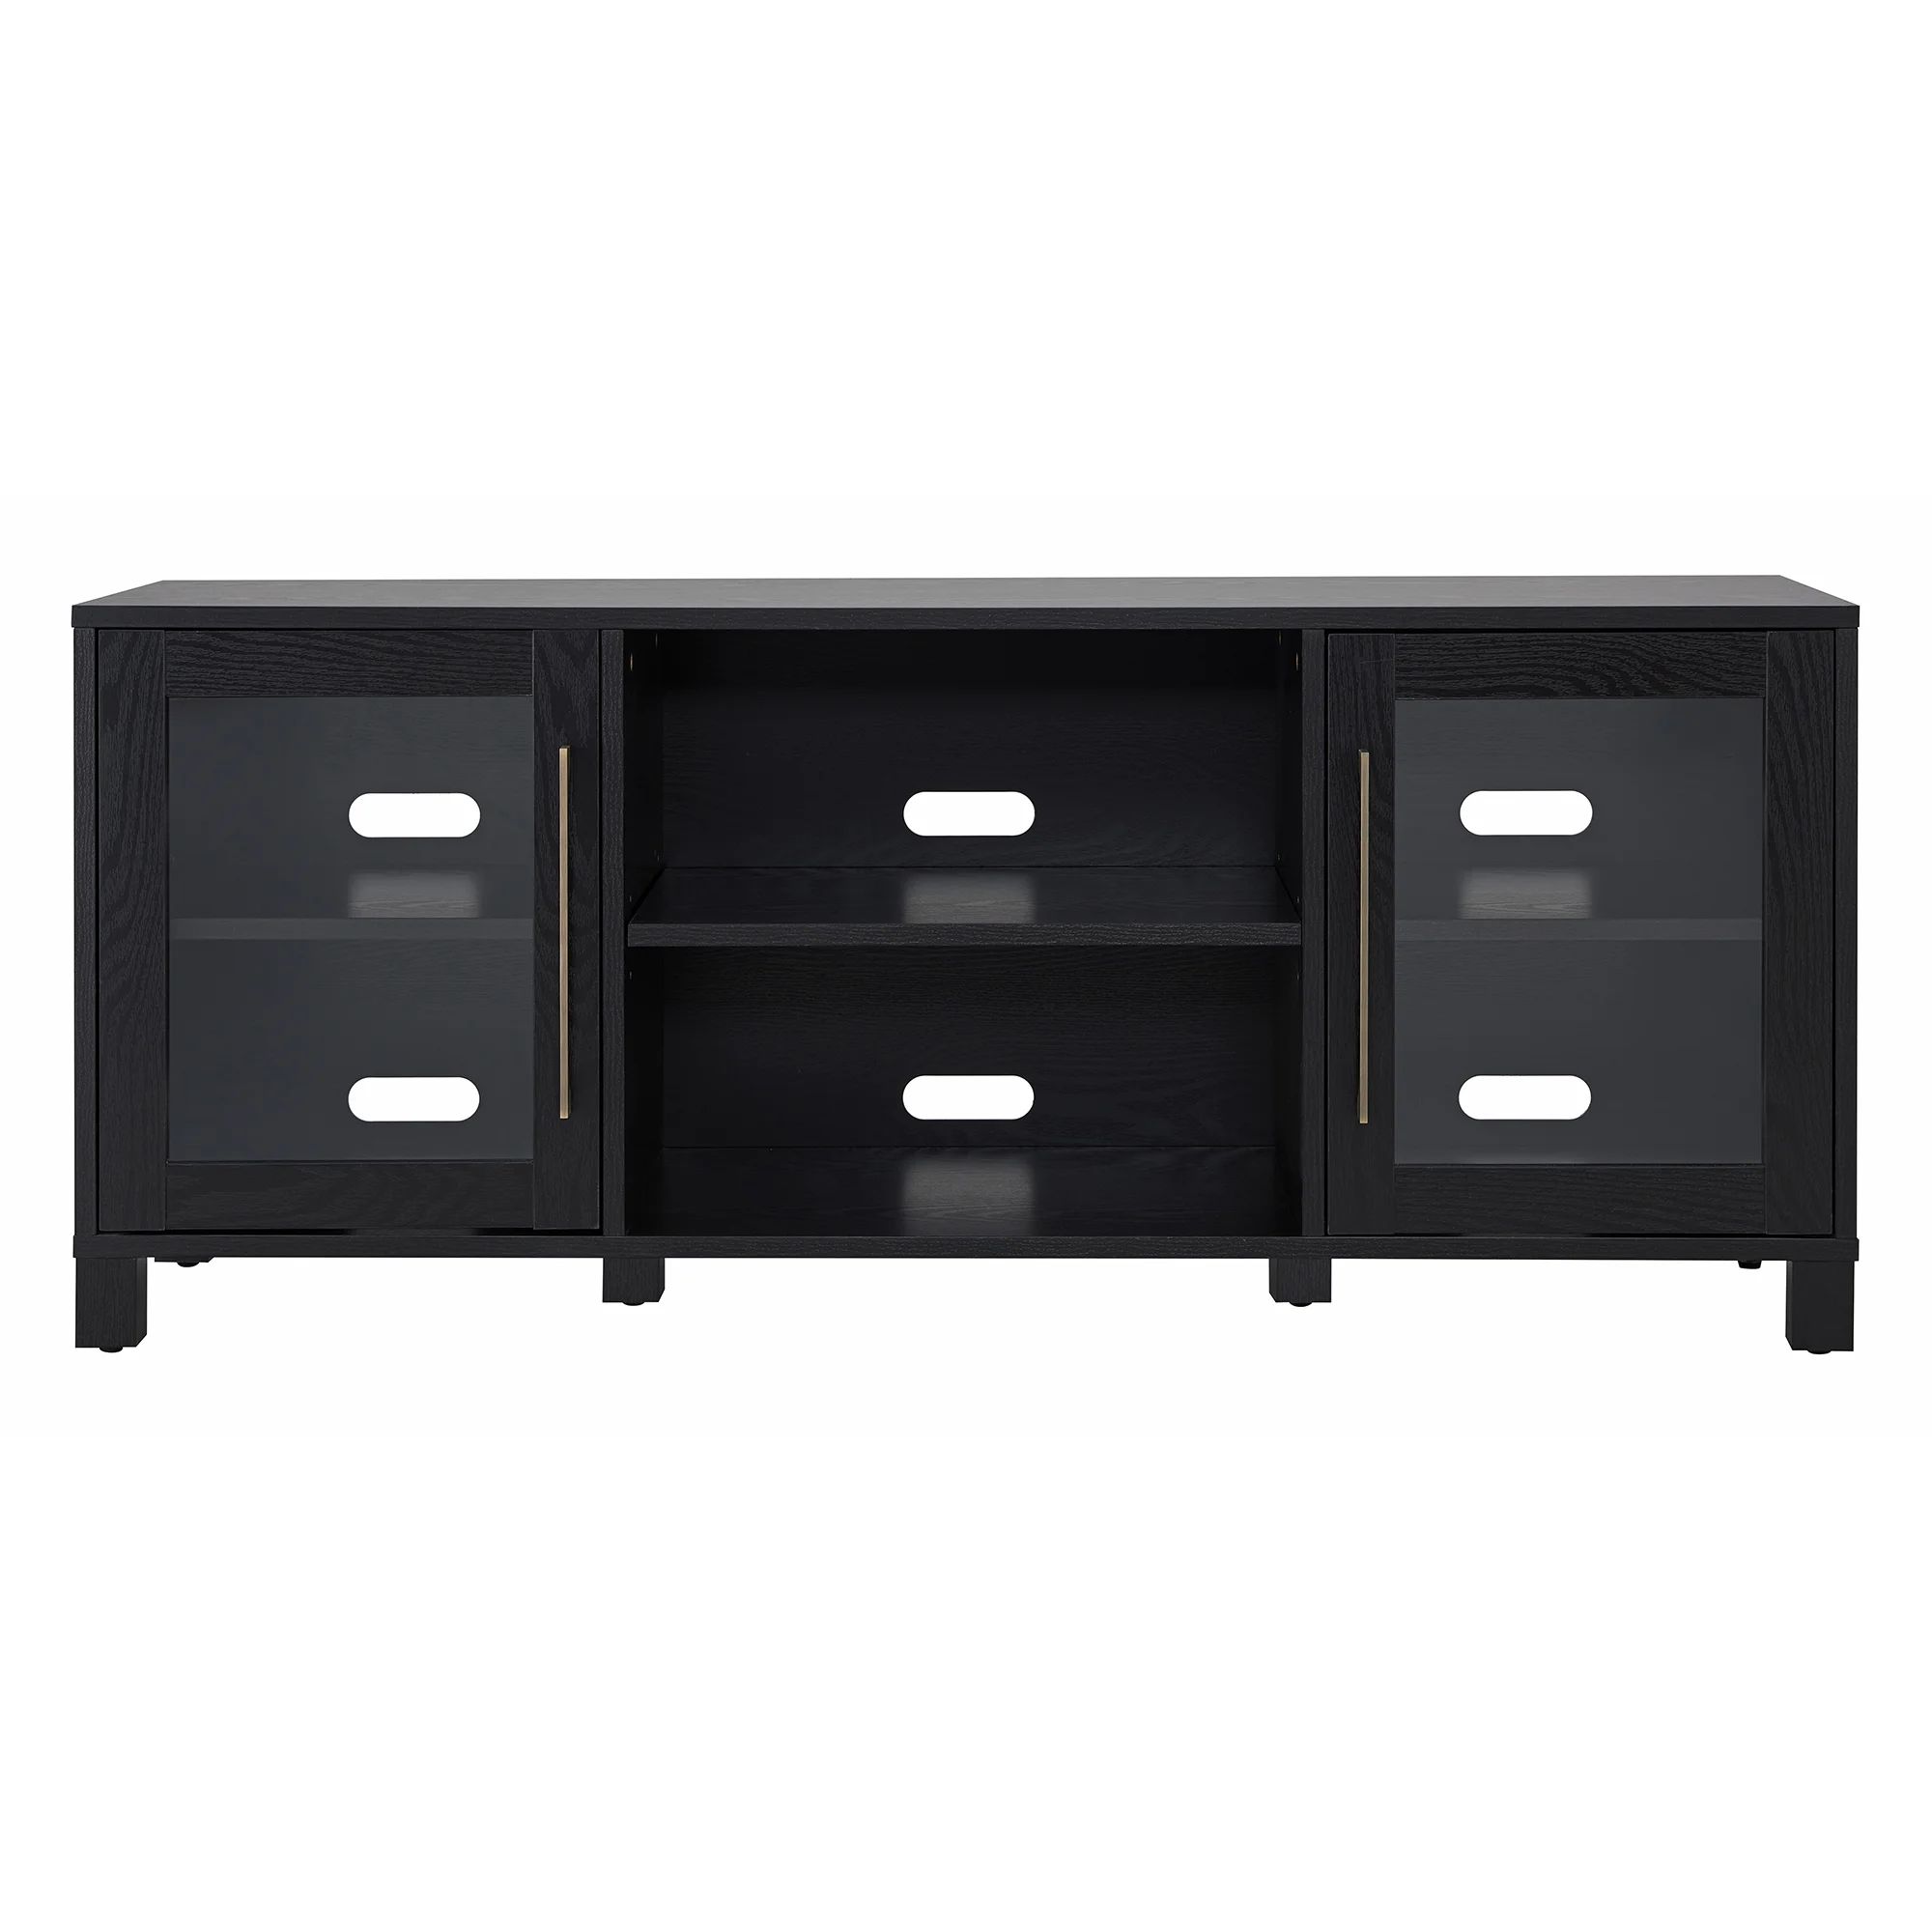 Munford TV Stand for TVs up to 65" | Wayfair North America